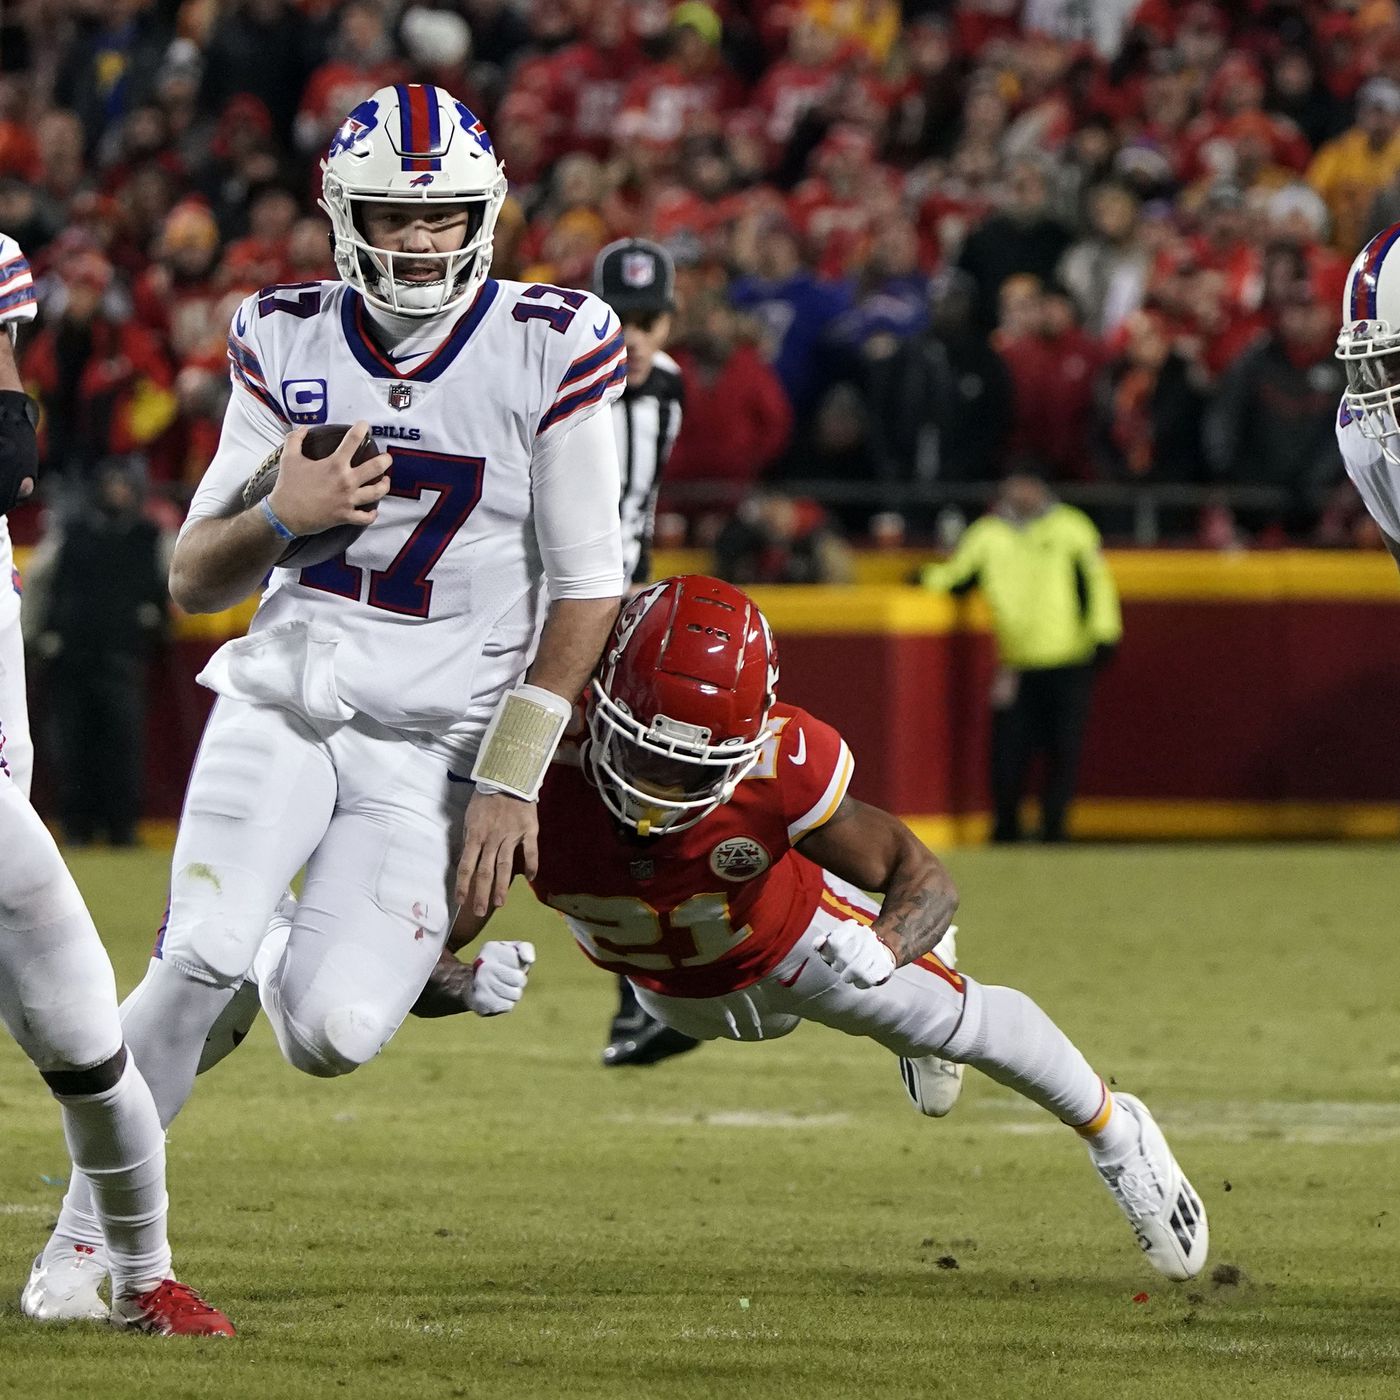 Josh Allen not yet ruled out of Sunday's game against Vikings